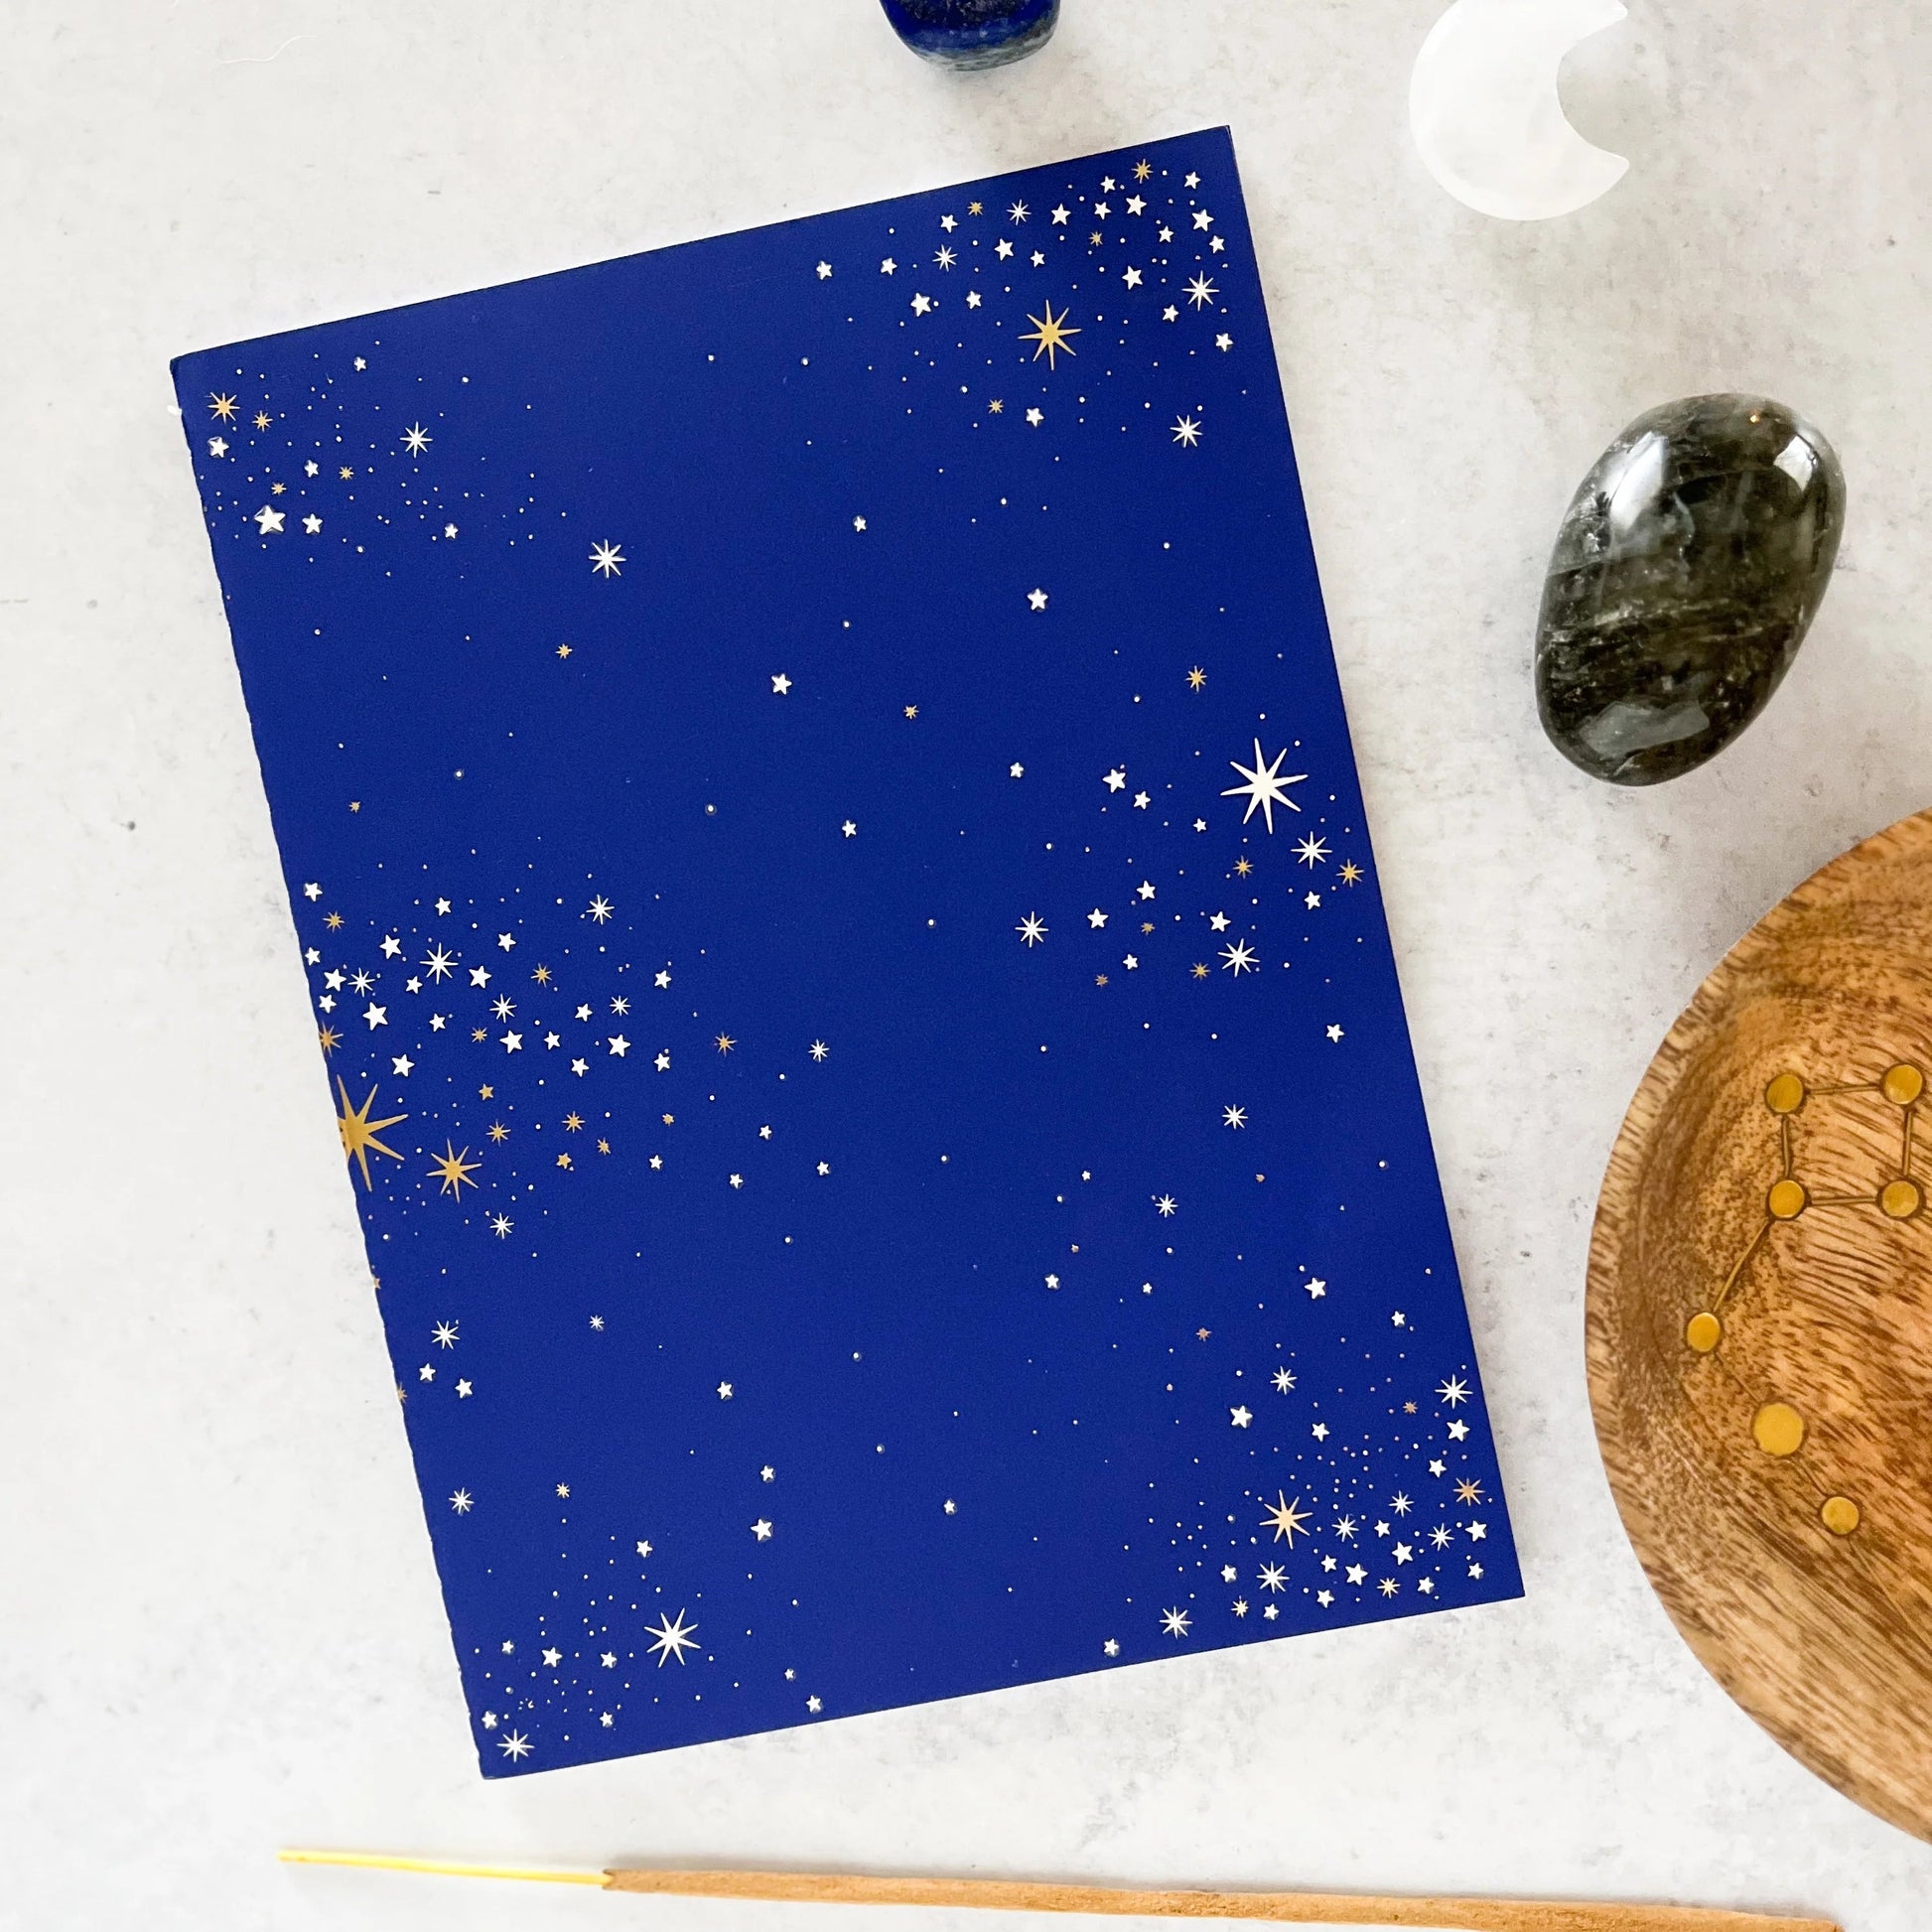 Dark blue celestial journal with white and gold stars 